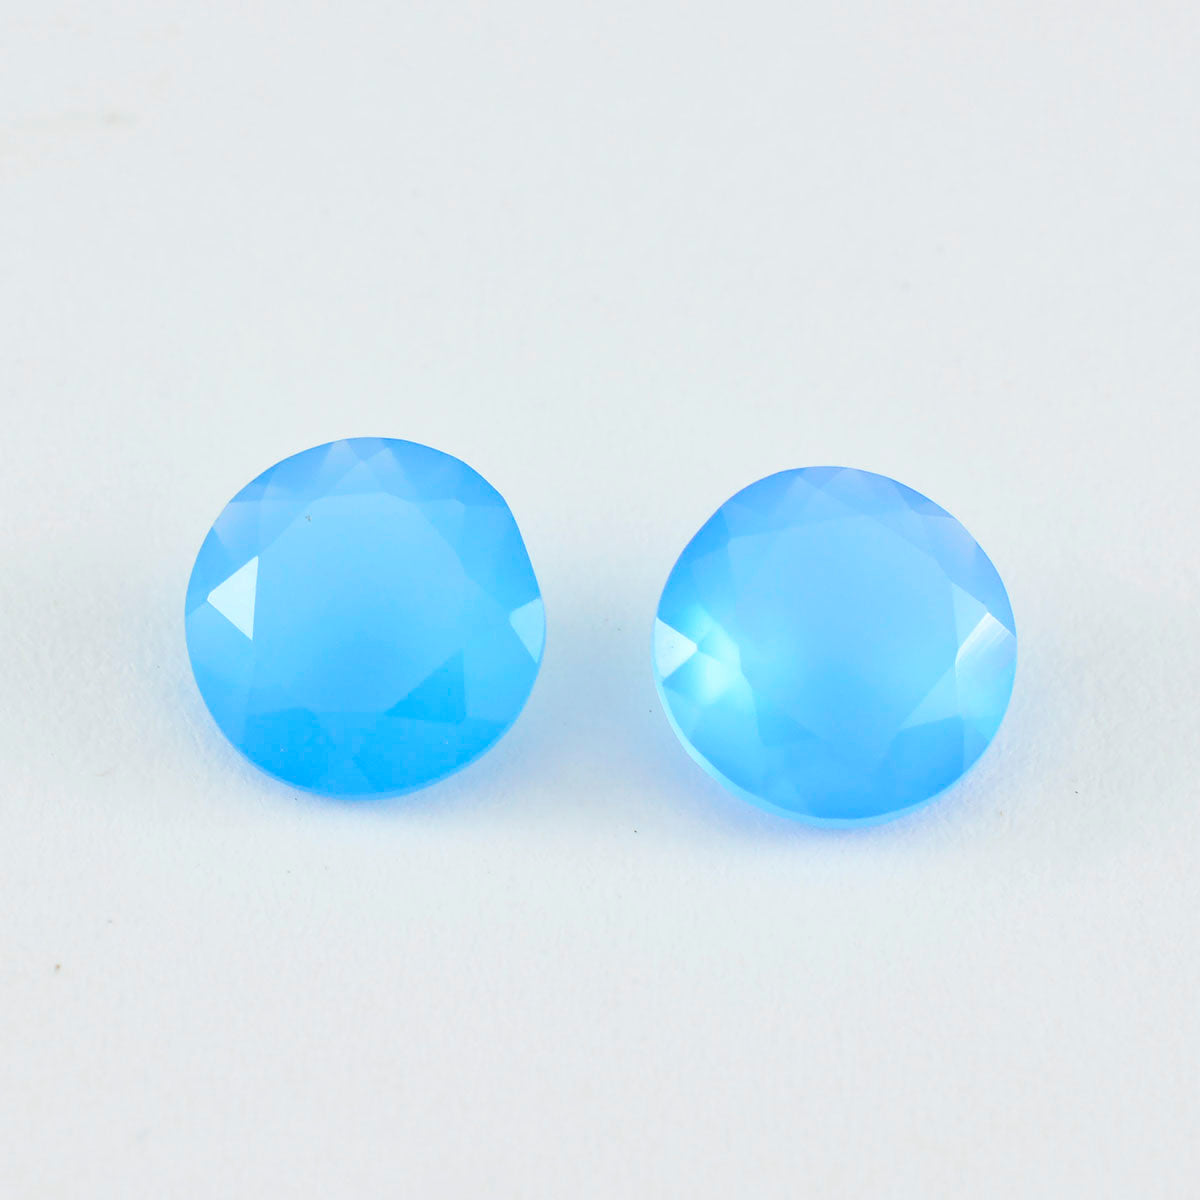 Riyogems 1PC Real Blue Chalcedony Faceted 10X10 mm Round Shape beauty Quality Loose Gems